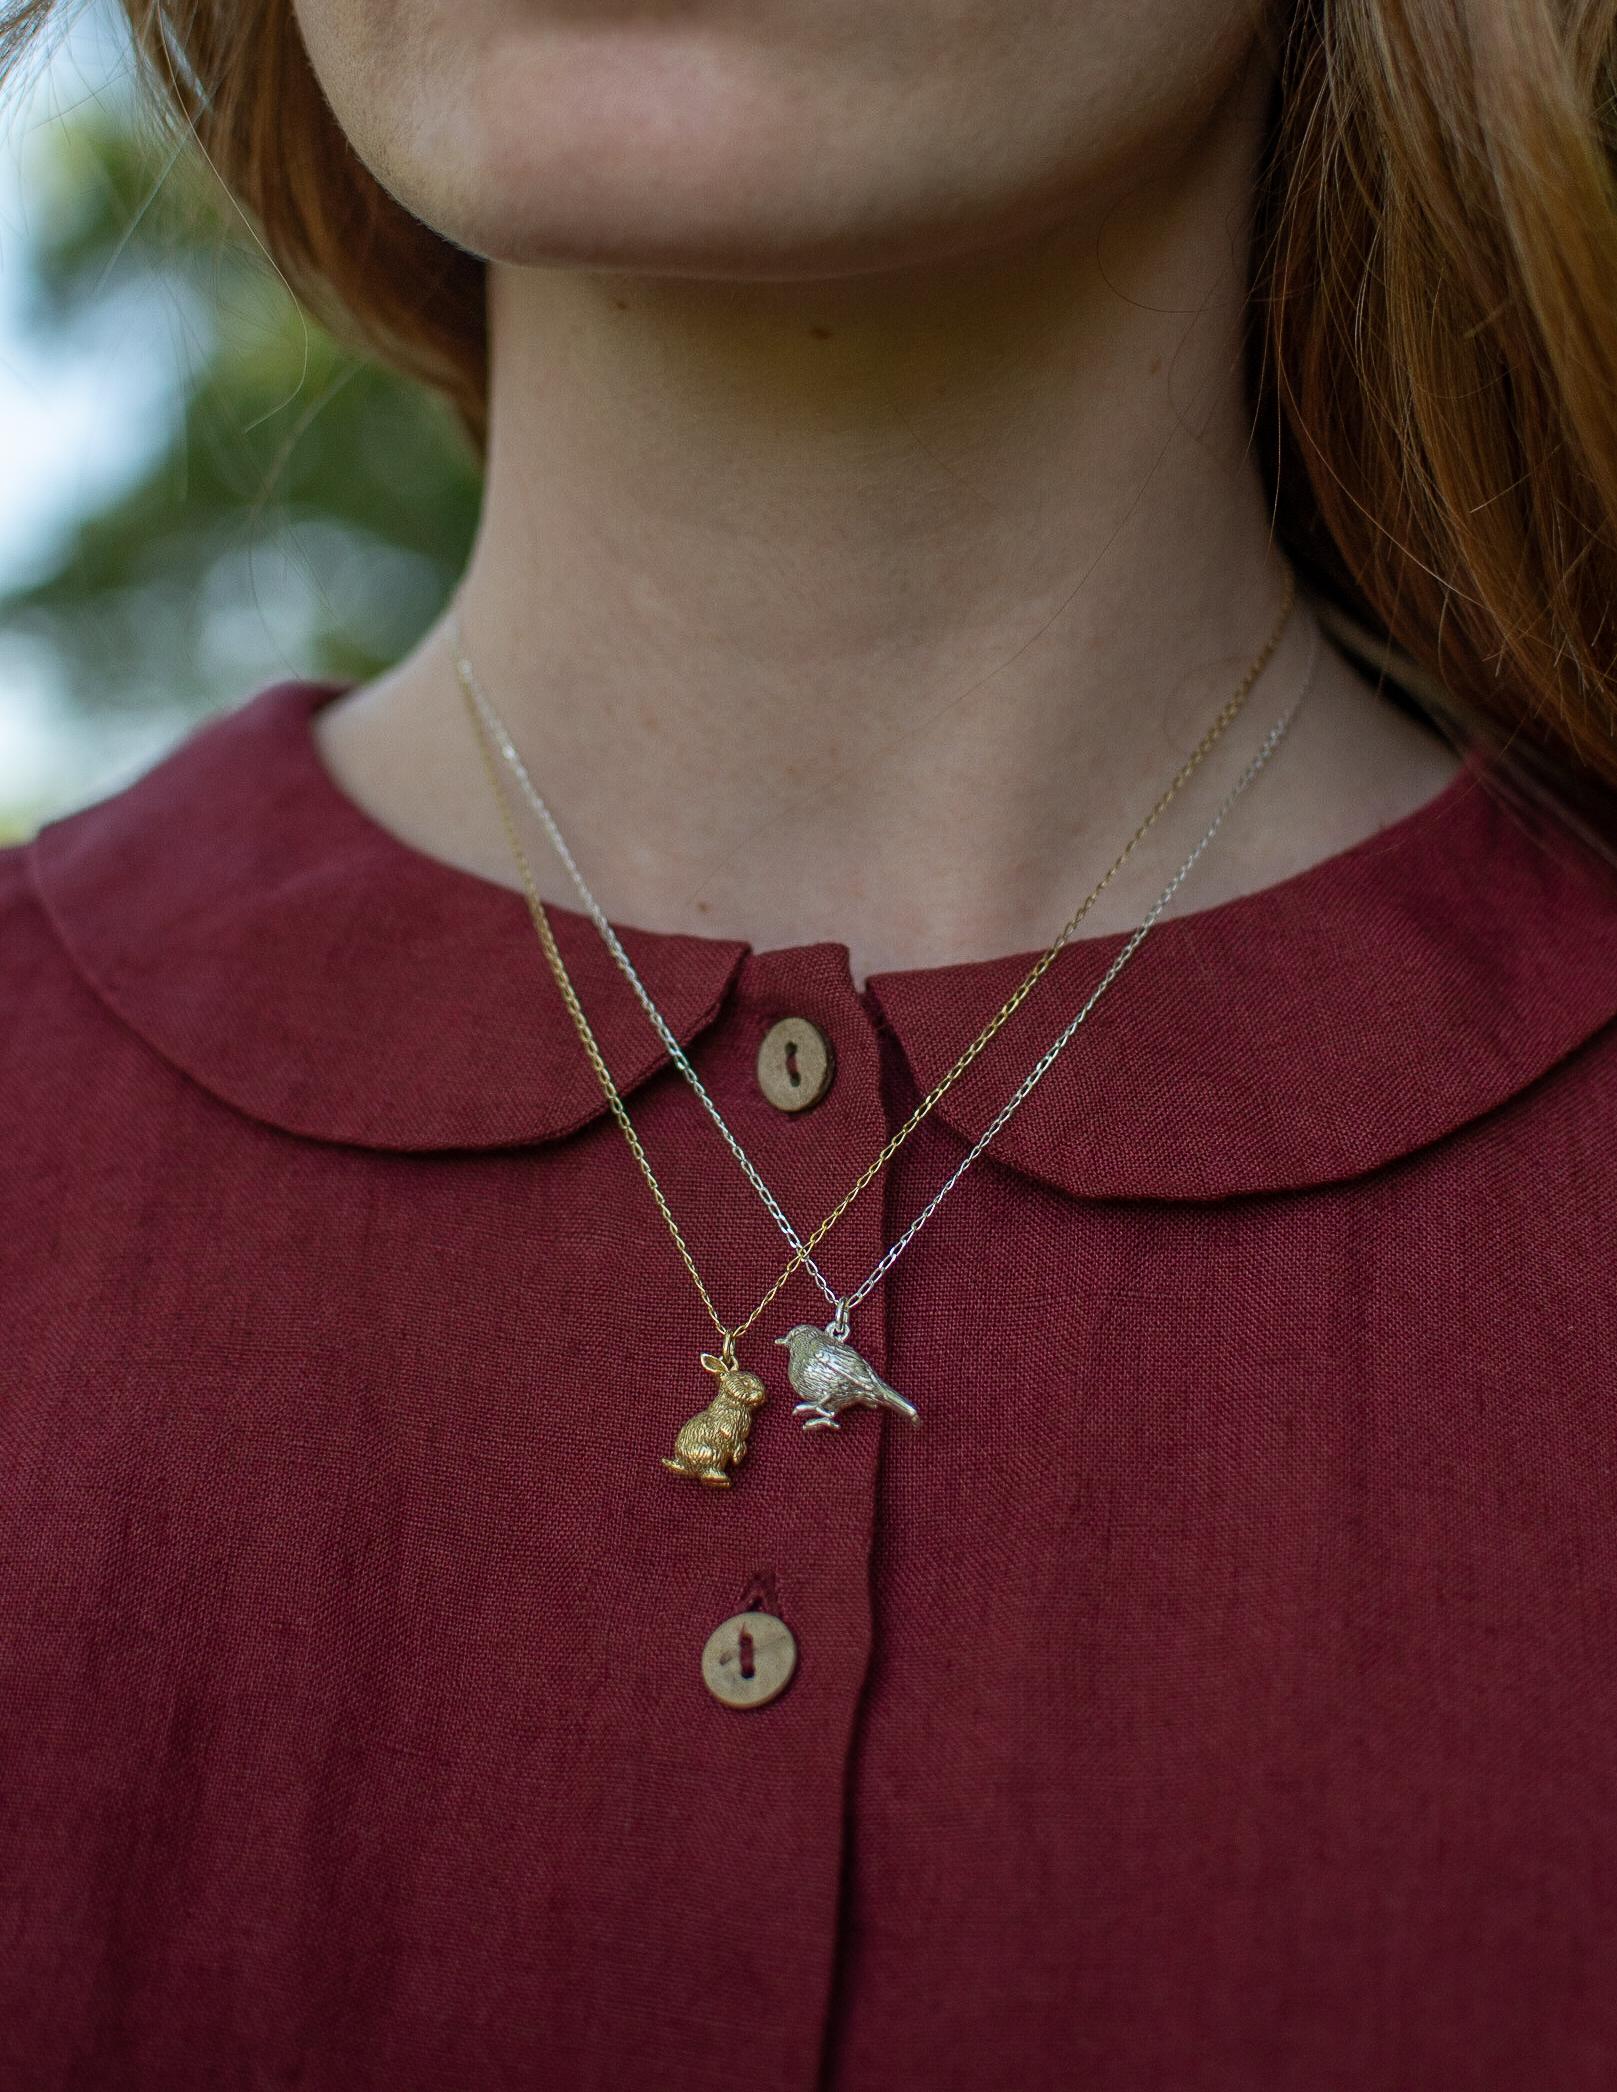 This sweet little robin pendant is cast in solid 18 Carat gold and finished by hand, and is created from Lucy's original hand-sculpted design. 

This robin pendant is made in London, United Kingdom using recycled or Fairtrade Gold. Metals are